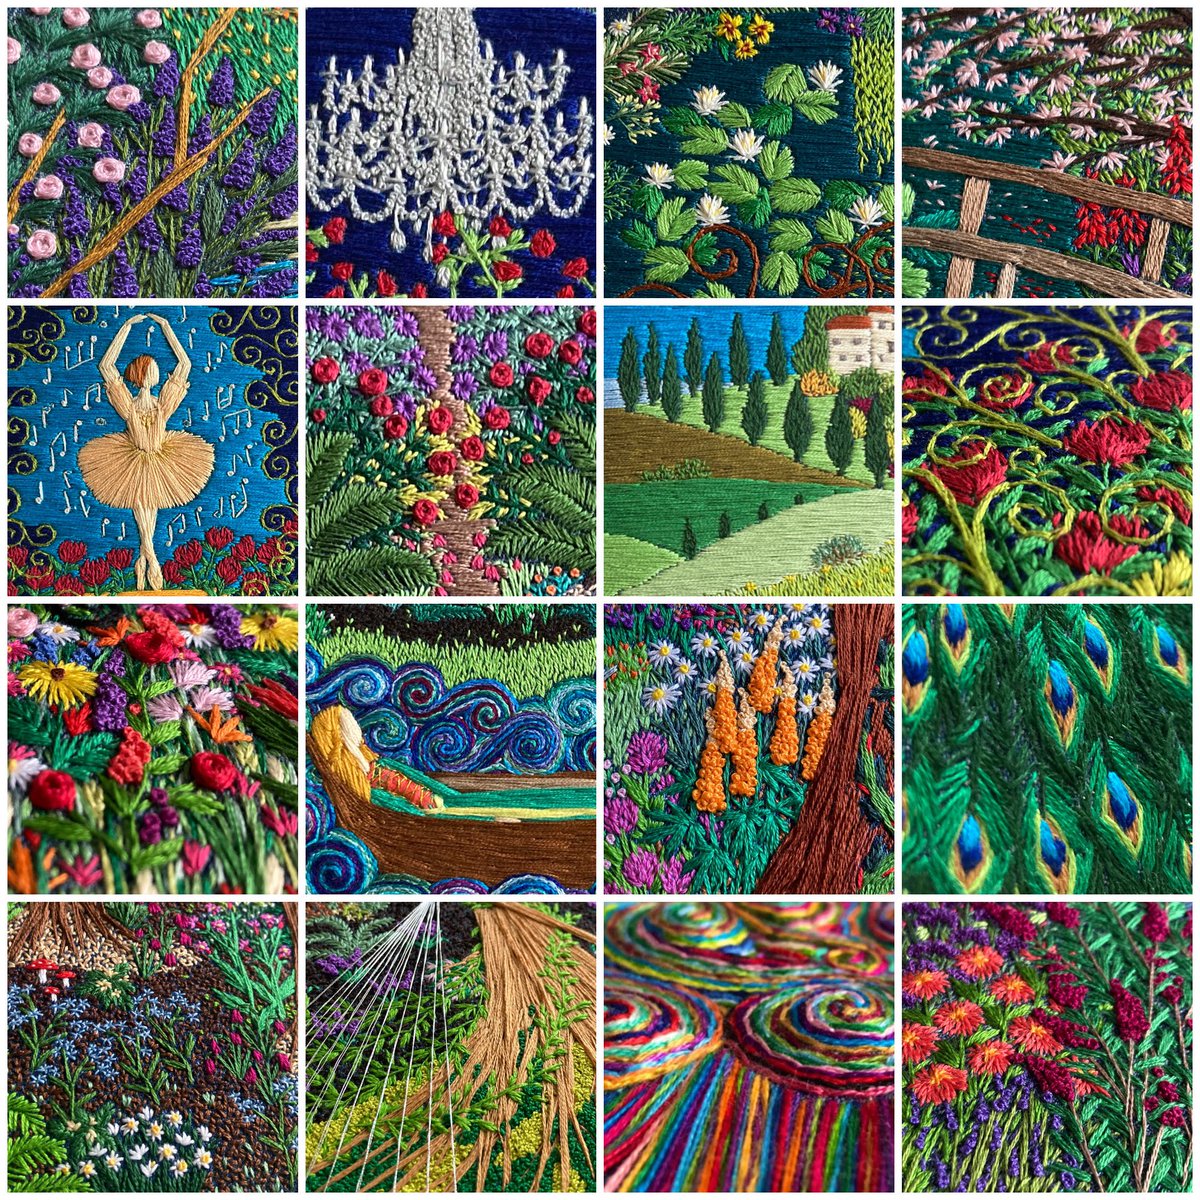 Good morning, here’s a colourful collage to start your week… All are snippets taken from some of my embroideries. I hope it brightens up the grey… 😊🧵🪡🌿🌺 #stitchedart #thesewingsongbird